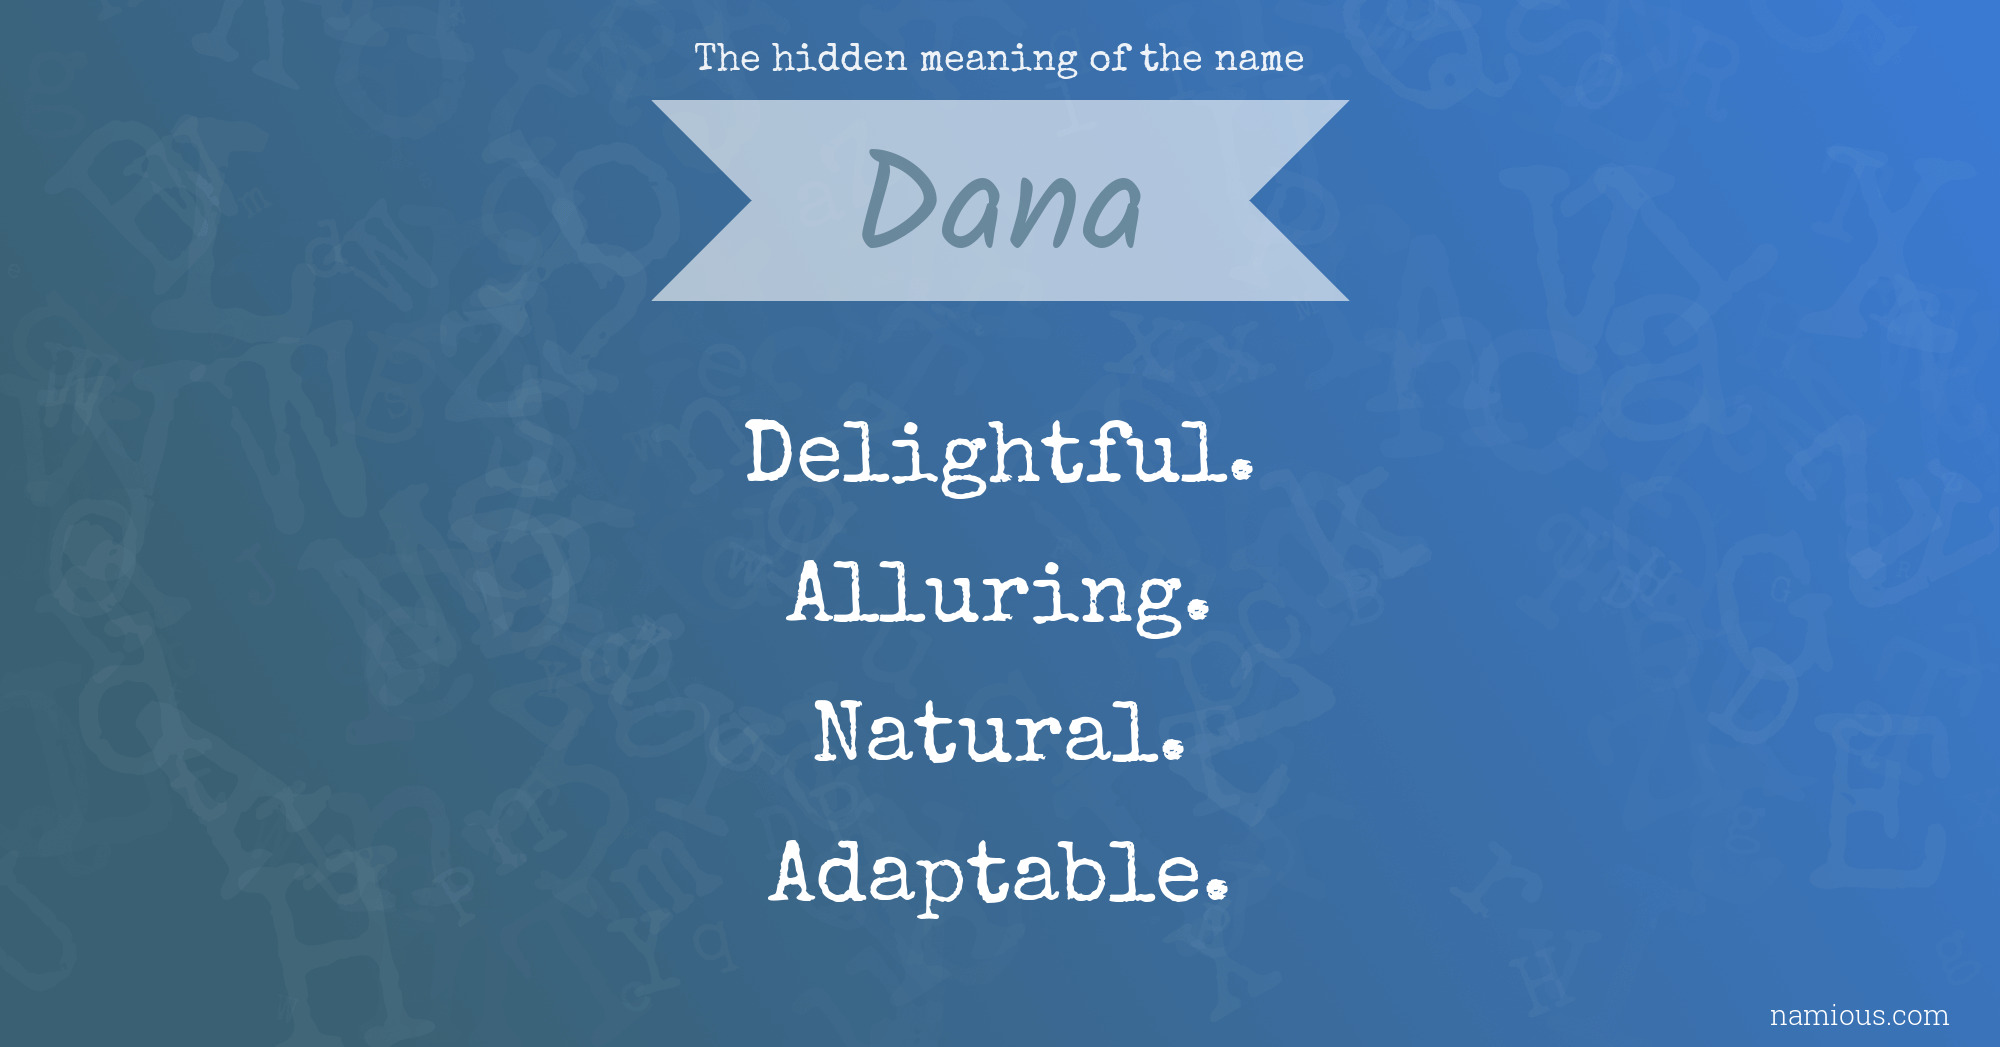 The hidden meaning of the name Dana